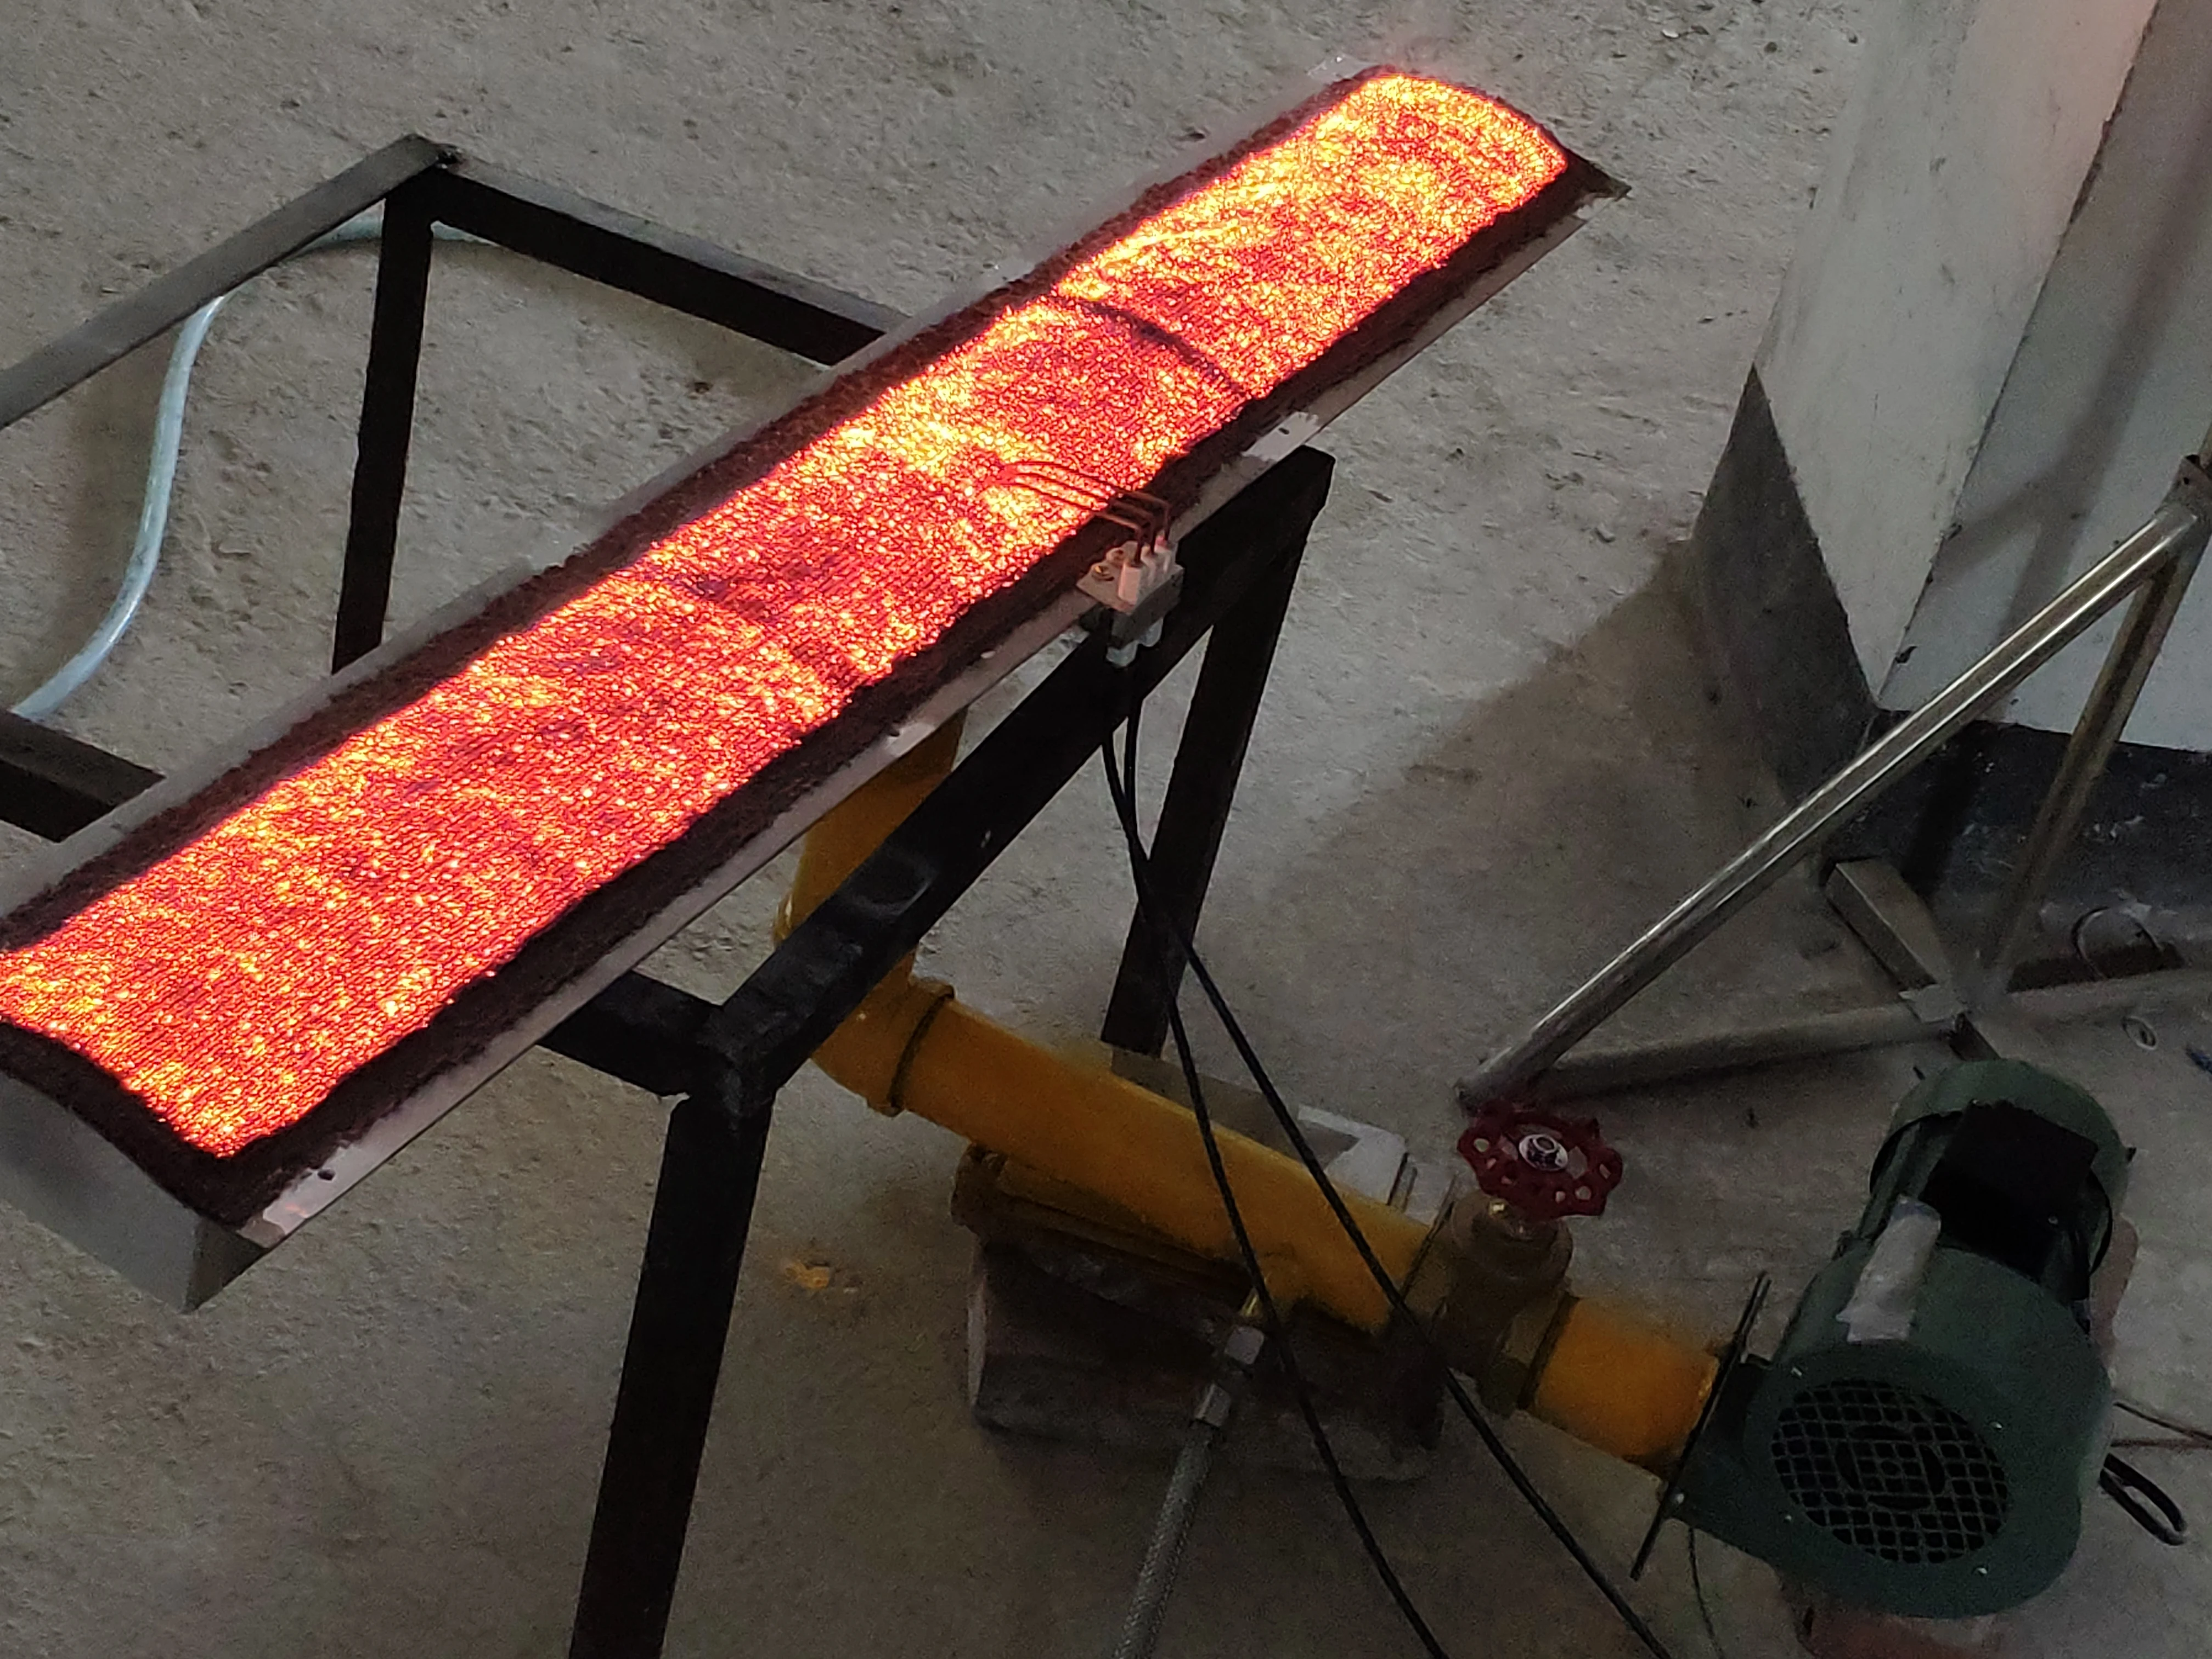 
50KW Metal fiber infrared burner for fast baking and drying 